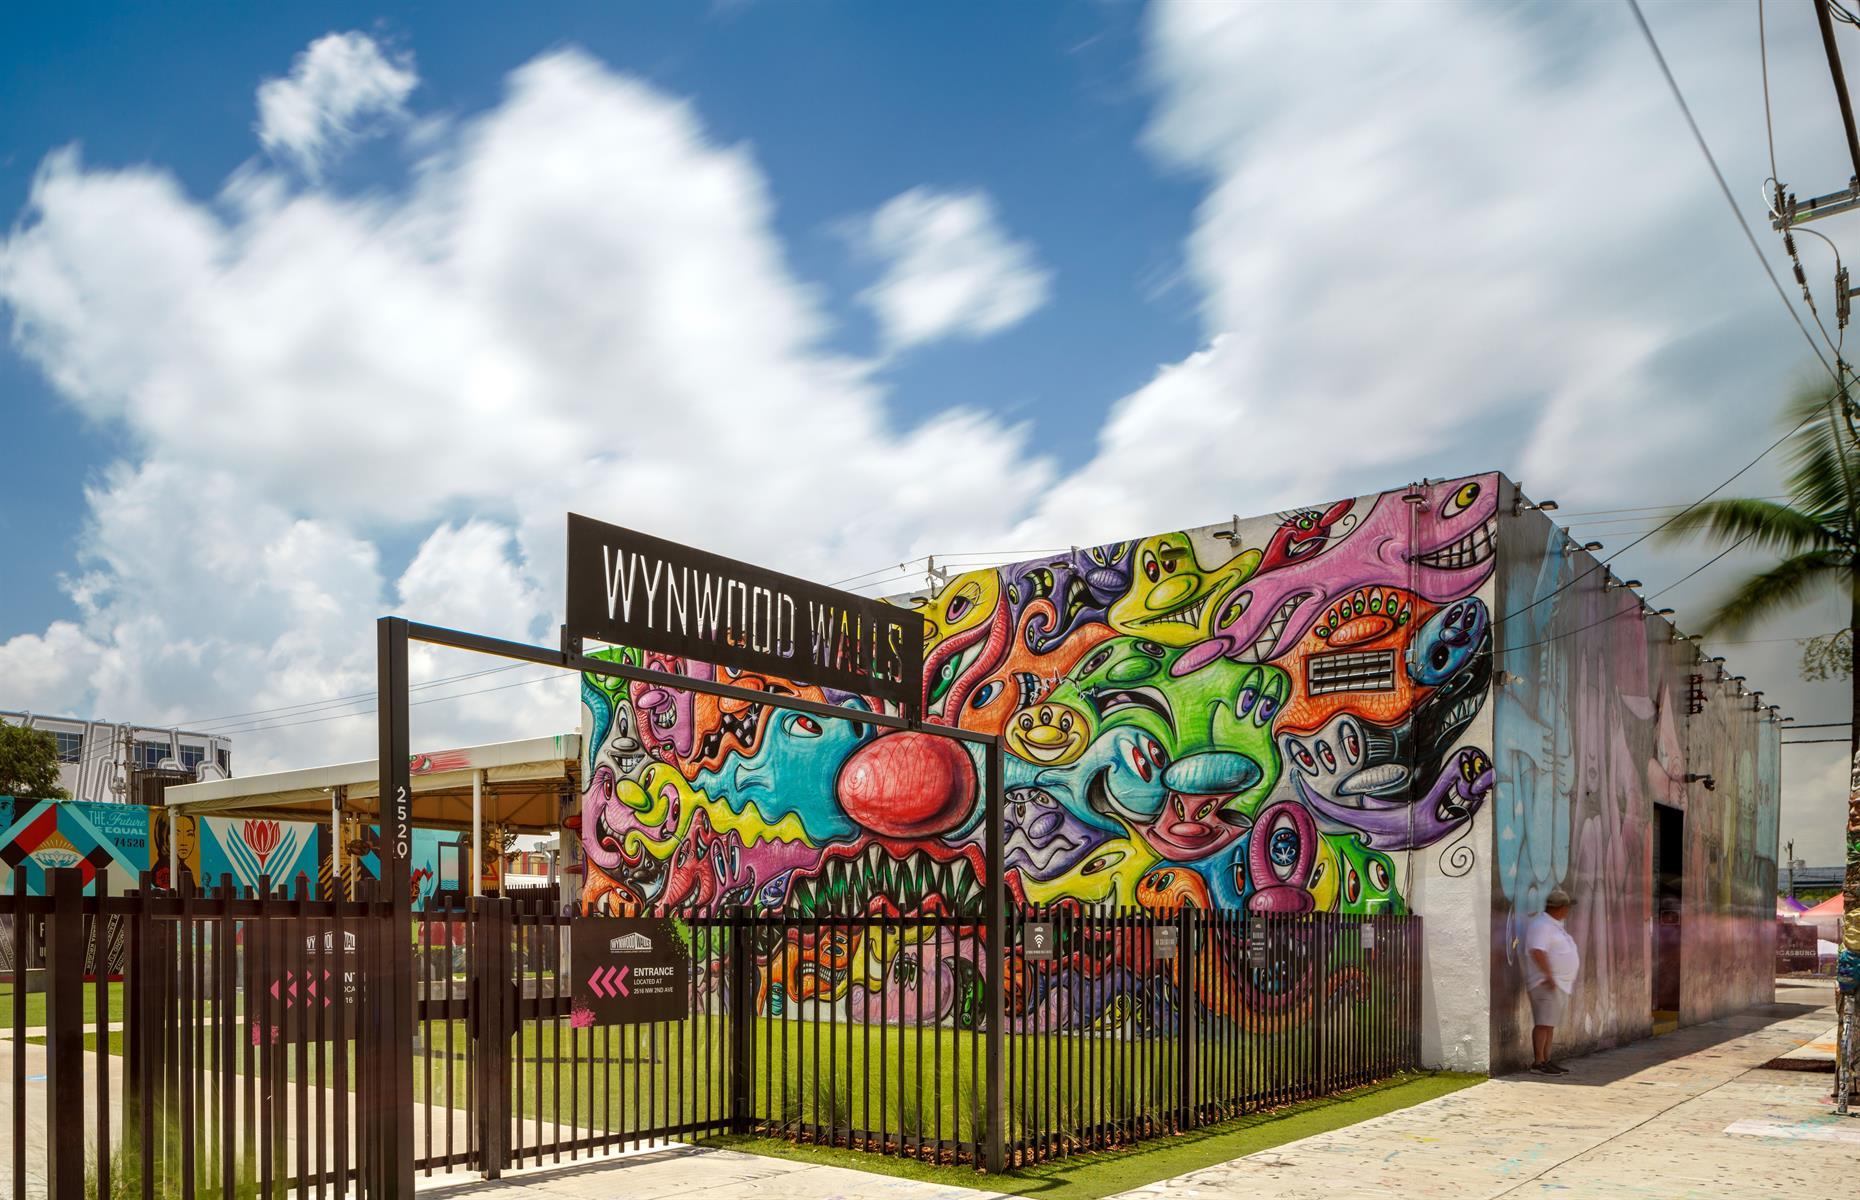 <p>A small neighborhood with a huge personality, the former industrial district of Wynwood is now a hub of culture, creativity and colour. Nowhere captures this better than the <a href="https://museum.thewynwoodwalls.com/main">Wynwood Walls</a>, an outdoor art museum showcasing world-class murals across six buildings. From graffiti to political pop art, the museum offers a curated collection from some of the most exciting muralists, street artists and sculptors working today. If you’re feeling inspired, be sure to check out Wynwood Walls’ spray can experience – included in your ticket price, this gives you the opportunity to leave your own mark on this innovative museum.</p>